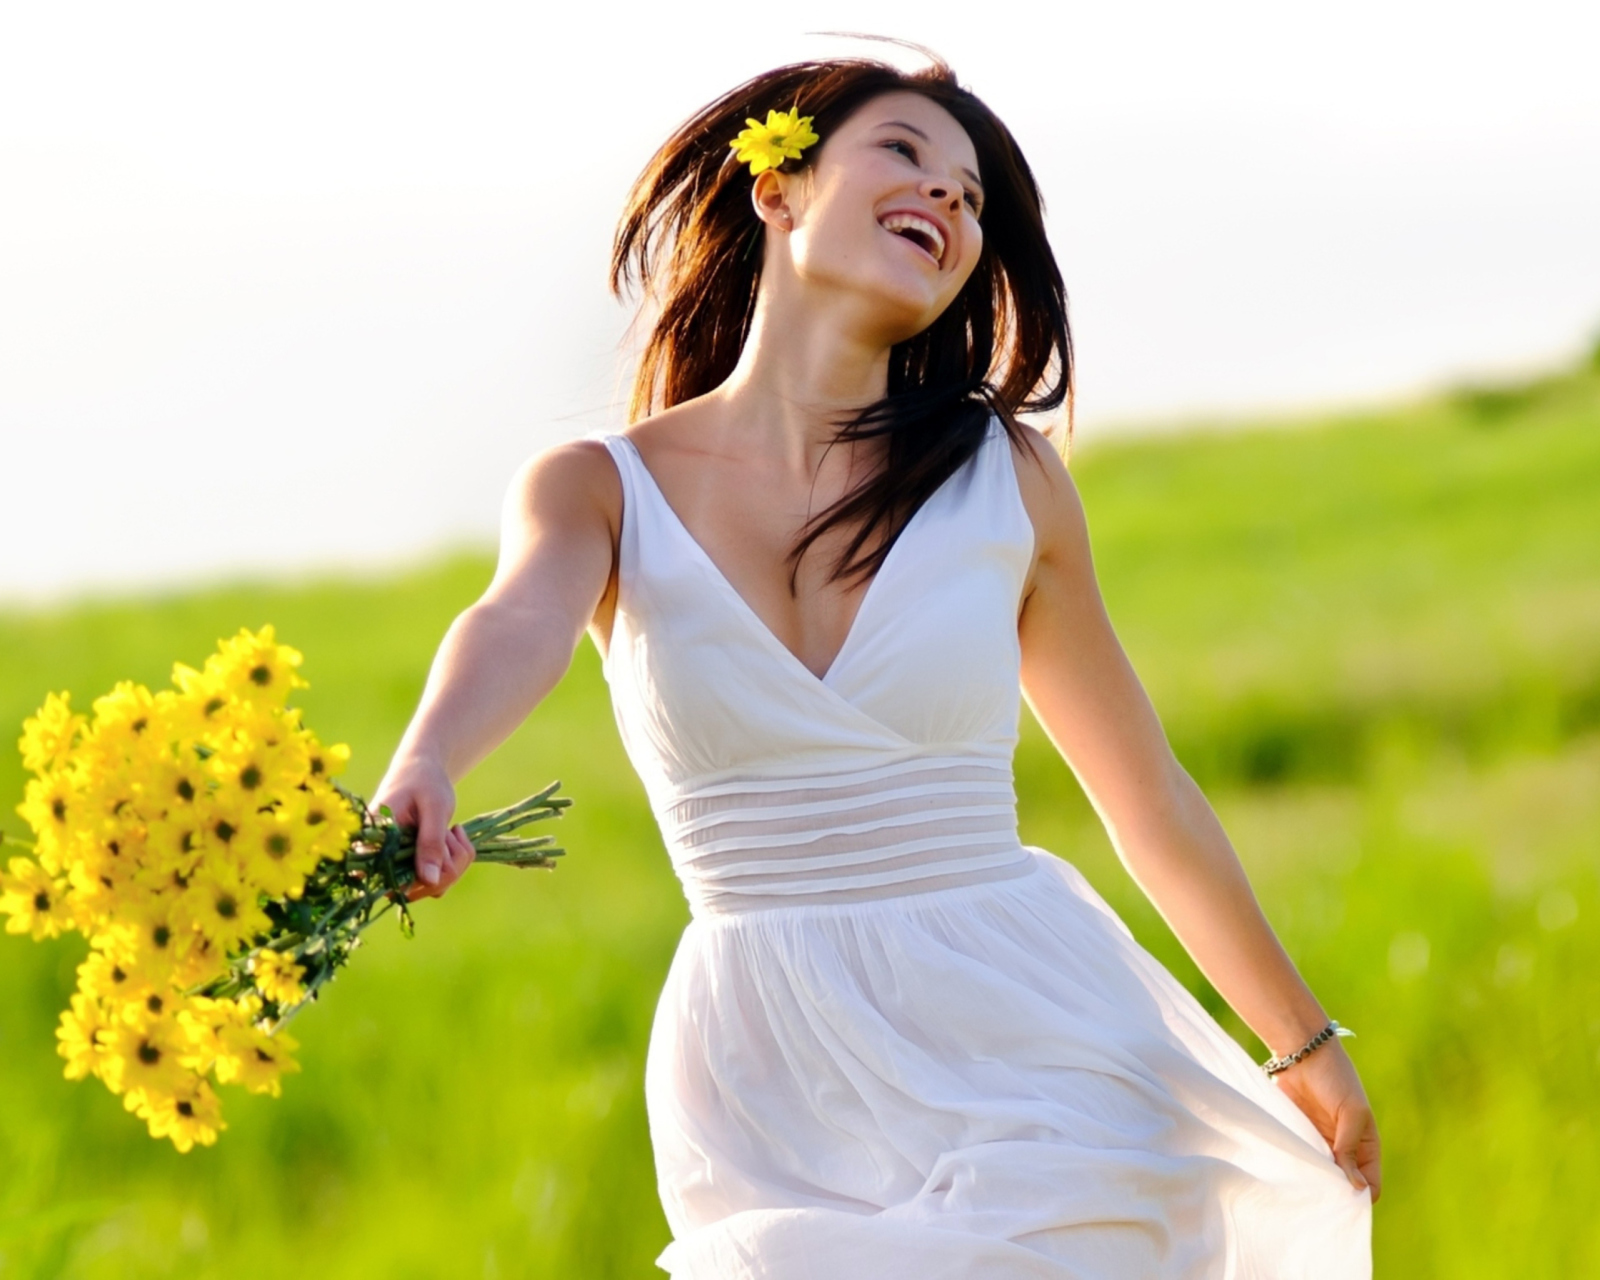 Happy Girl With Yellow Flowers wallpaper 1600x1280